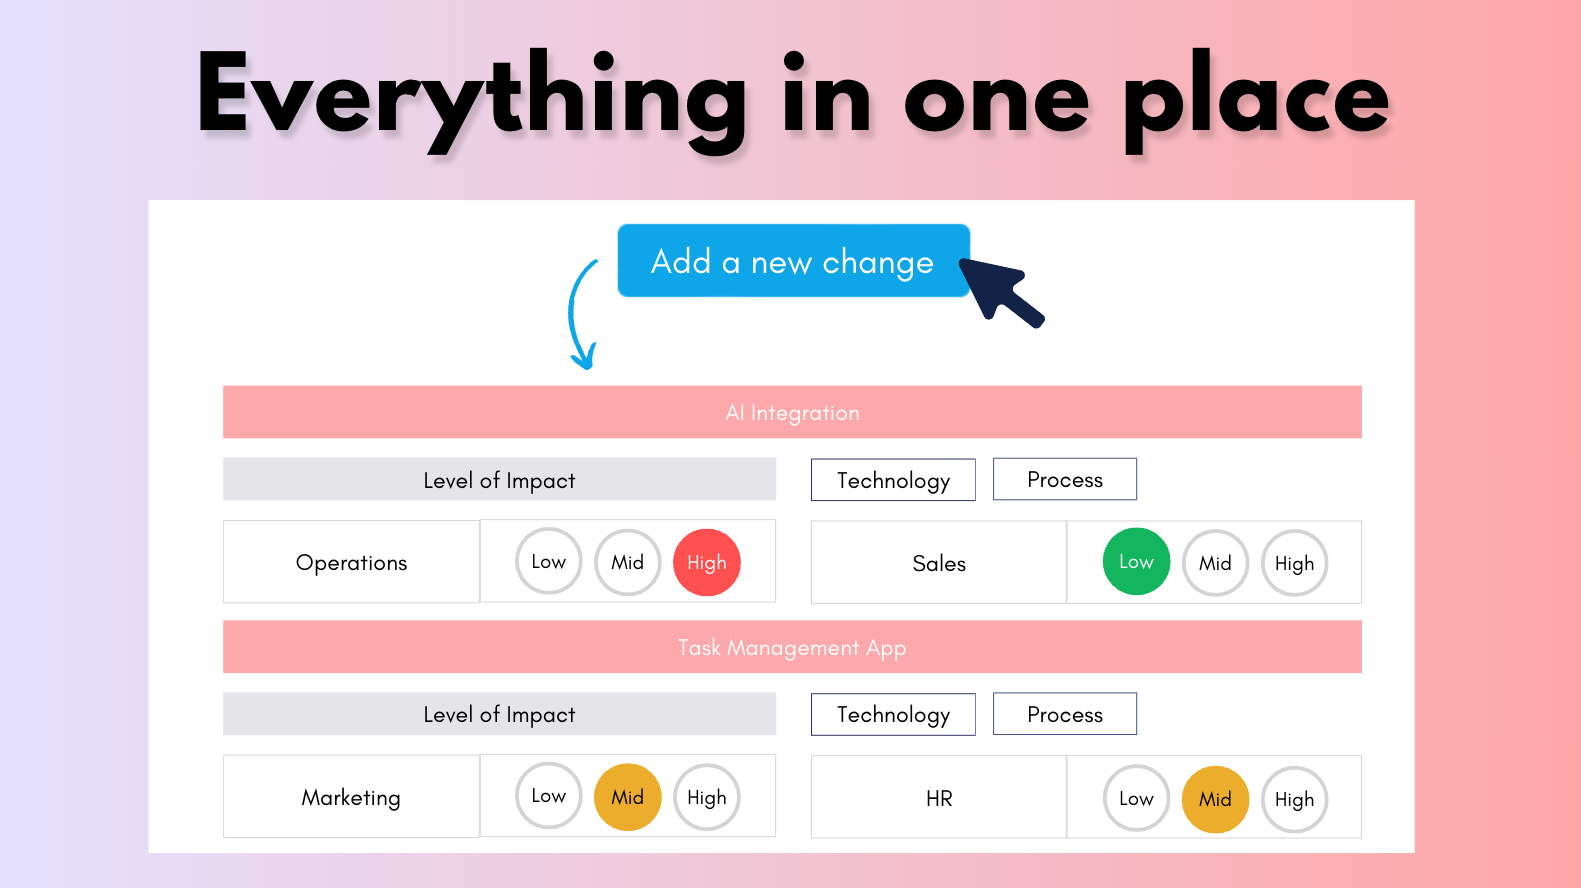 All in one place - Change impacts tool